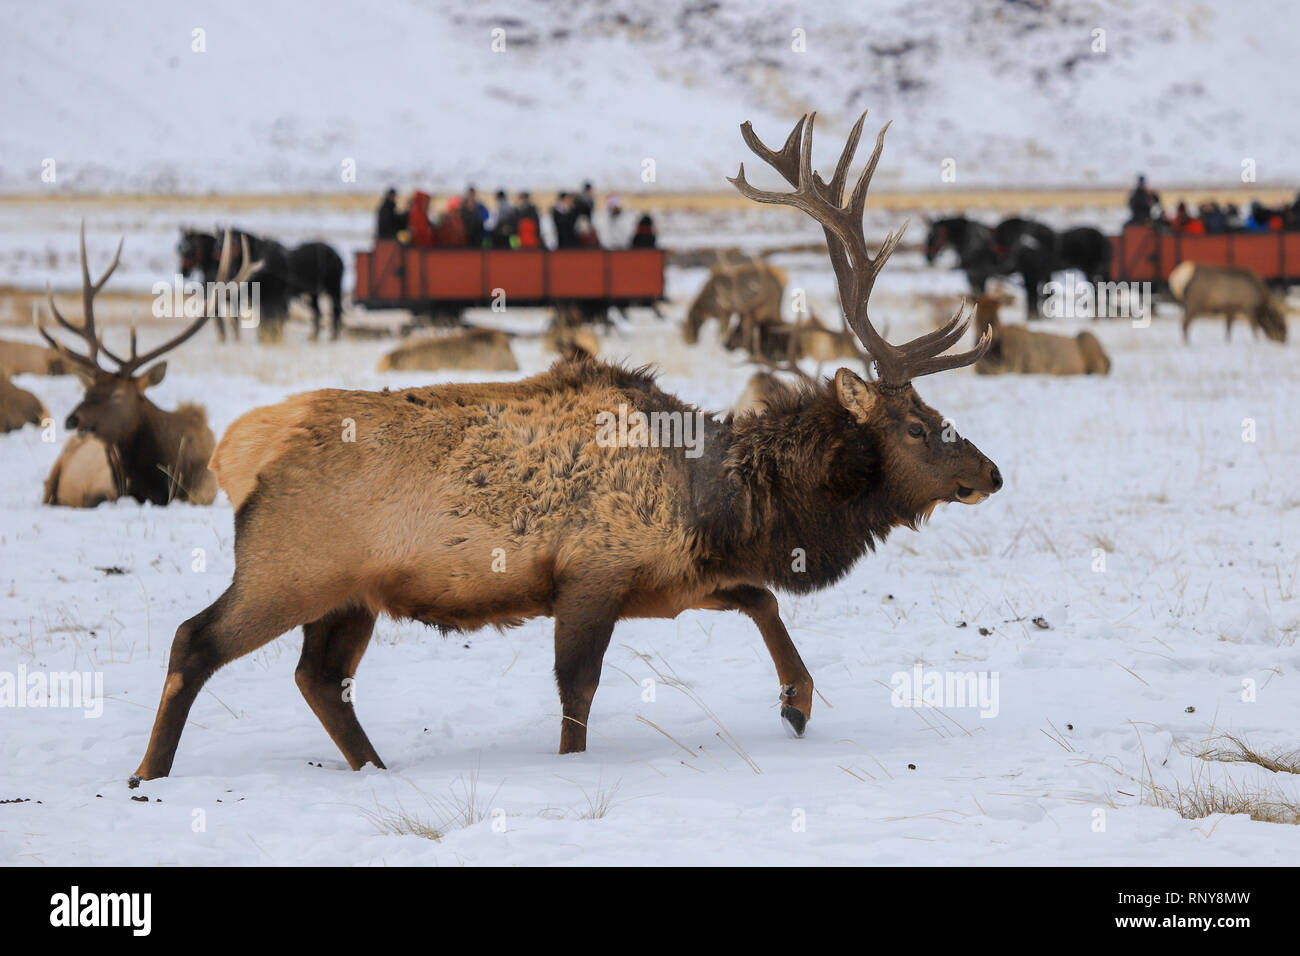 Rocky Mountain Bull elk in winter snow at the National Elk Refuge with people on a horse drawn sleigh ride in background Stock Photo